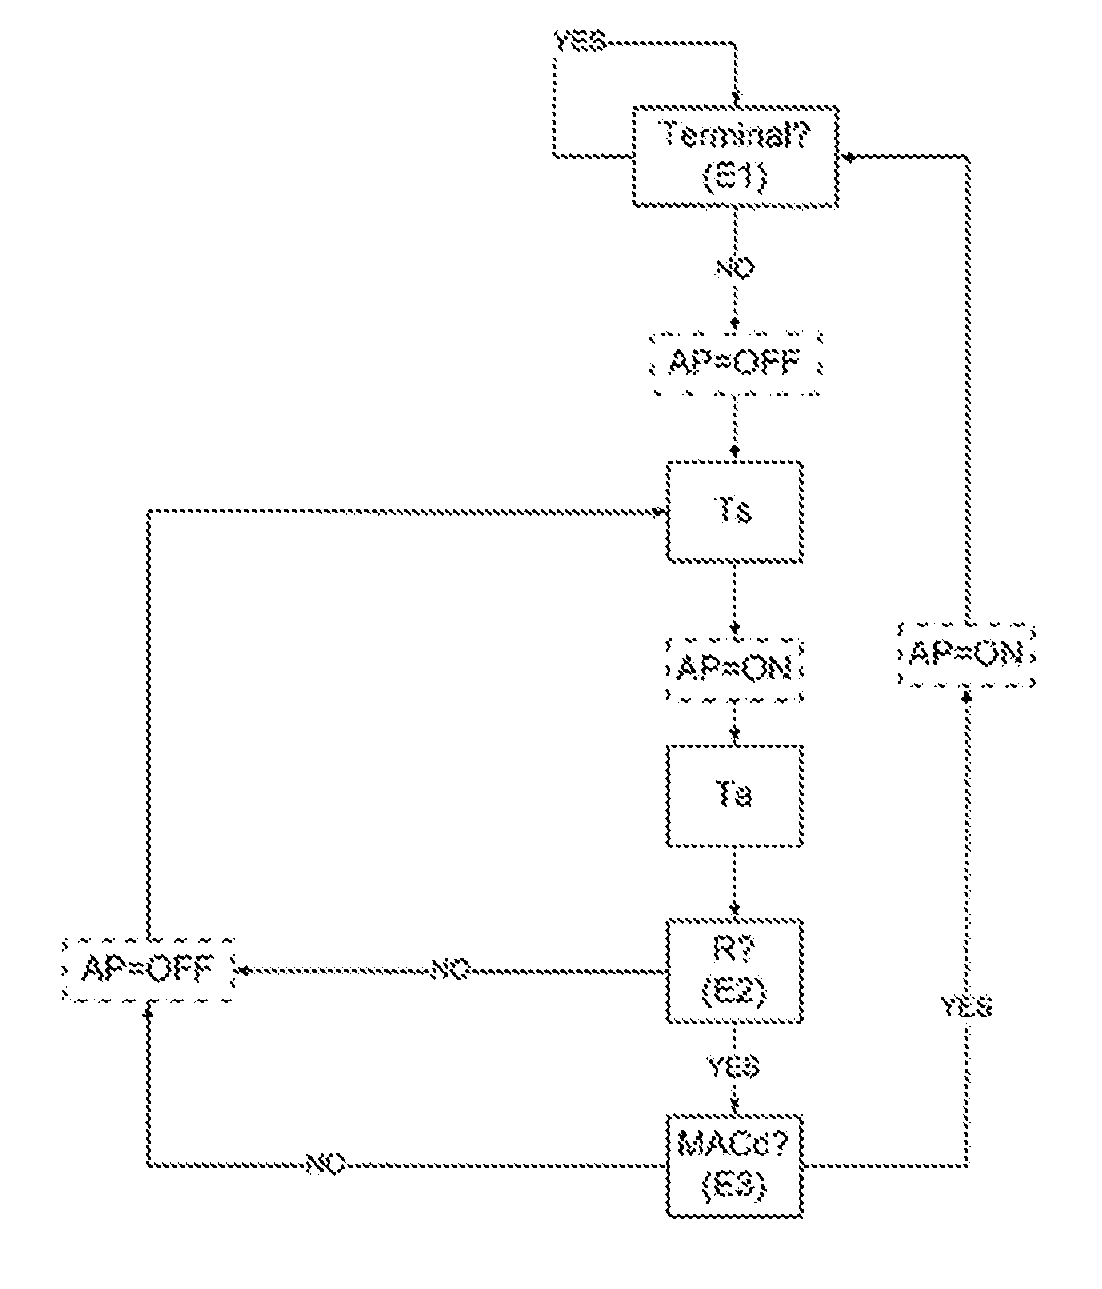 Method of control of an access point of a home gateway of a home network